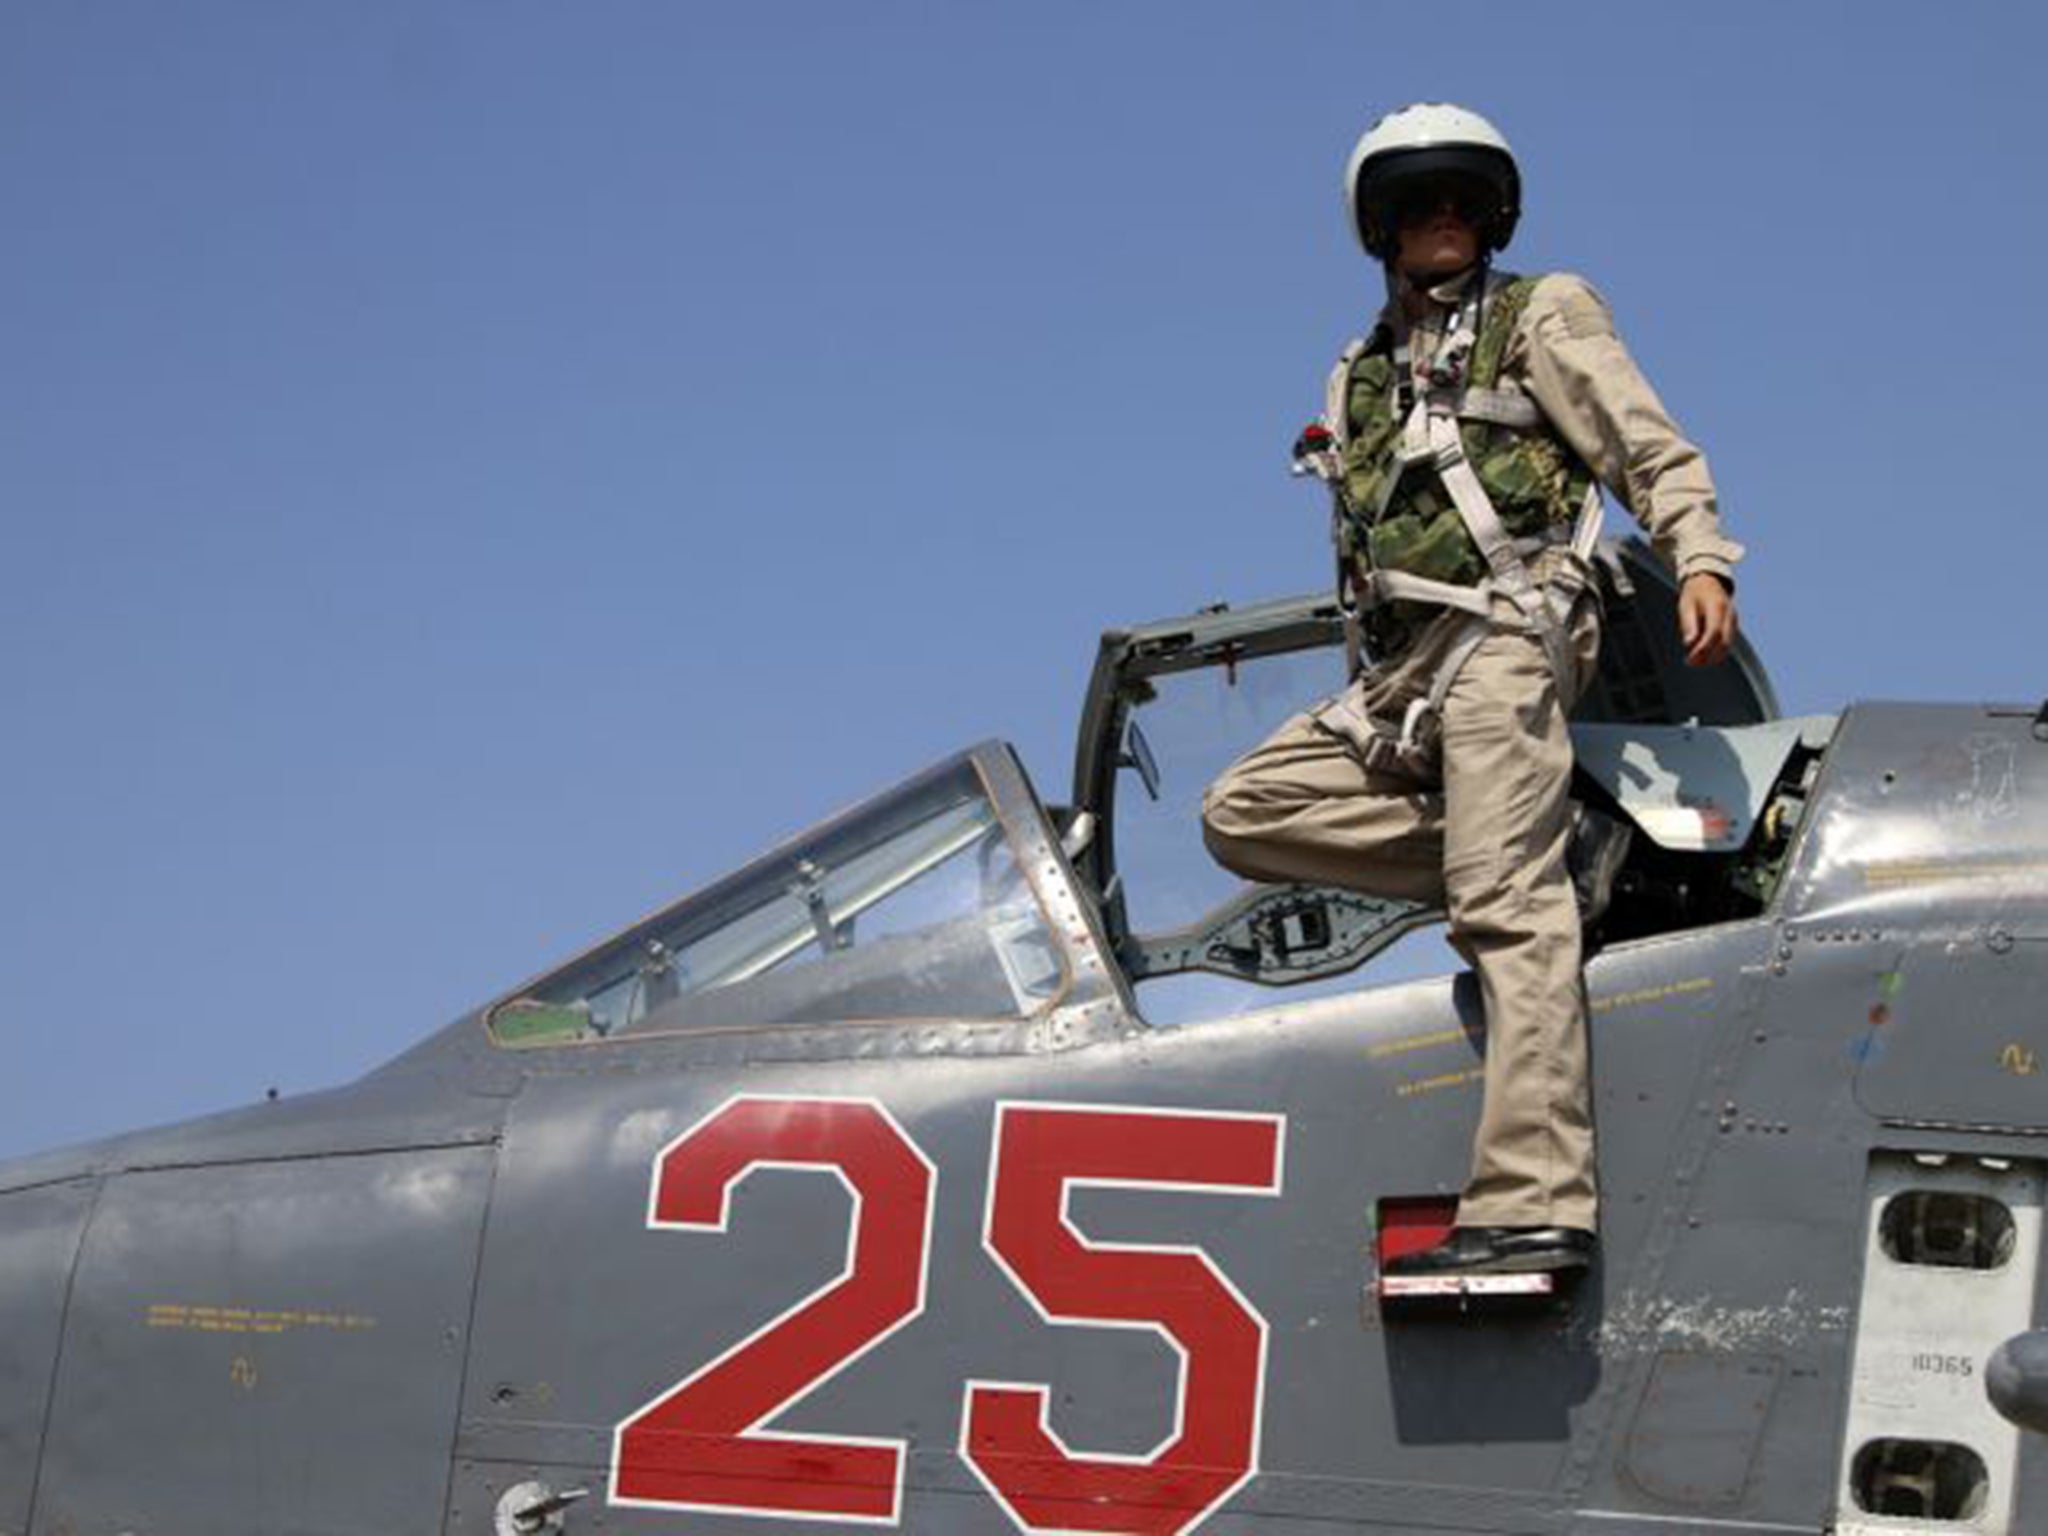 A Russian pilot climbs from an SU-25M jet fighter at Hmeimim airbase in Syria